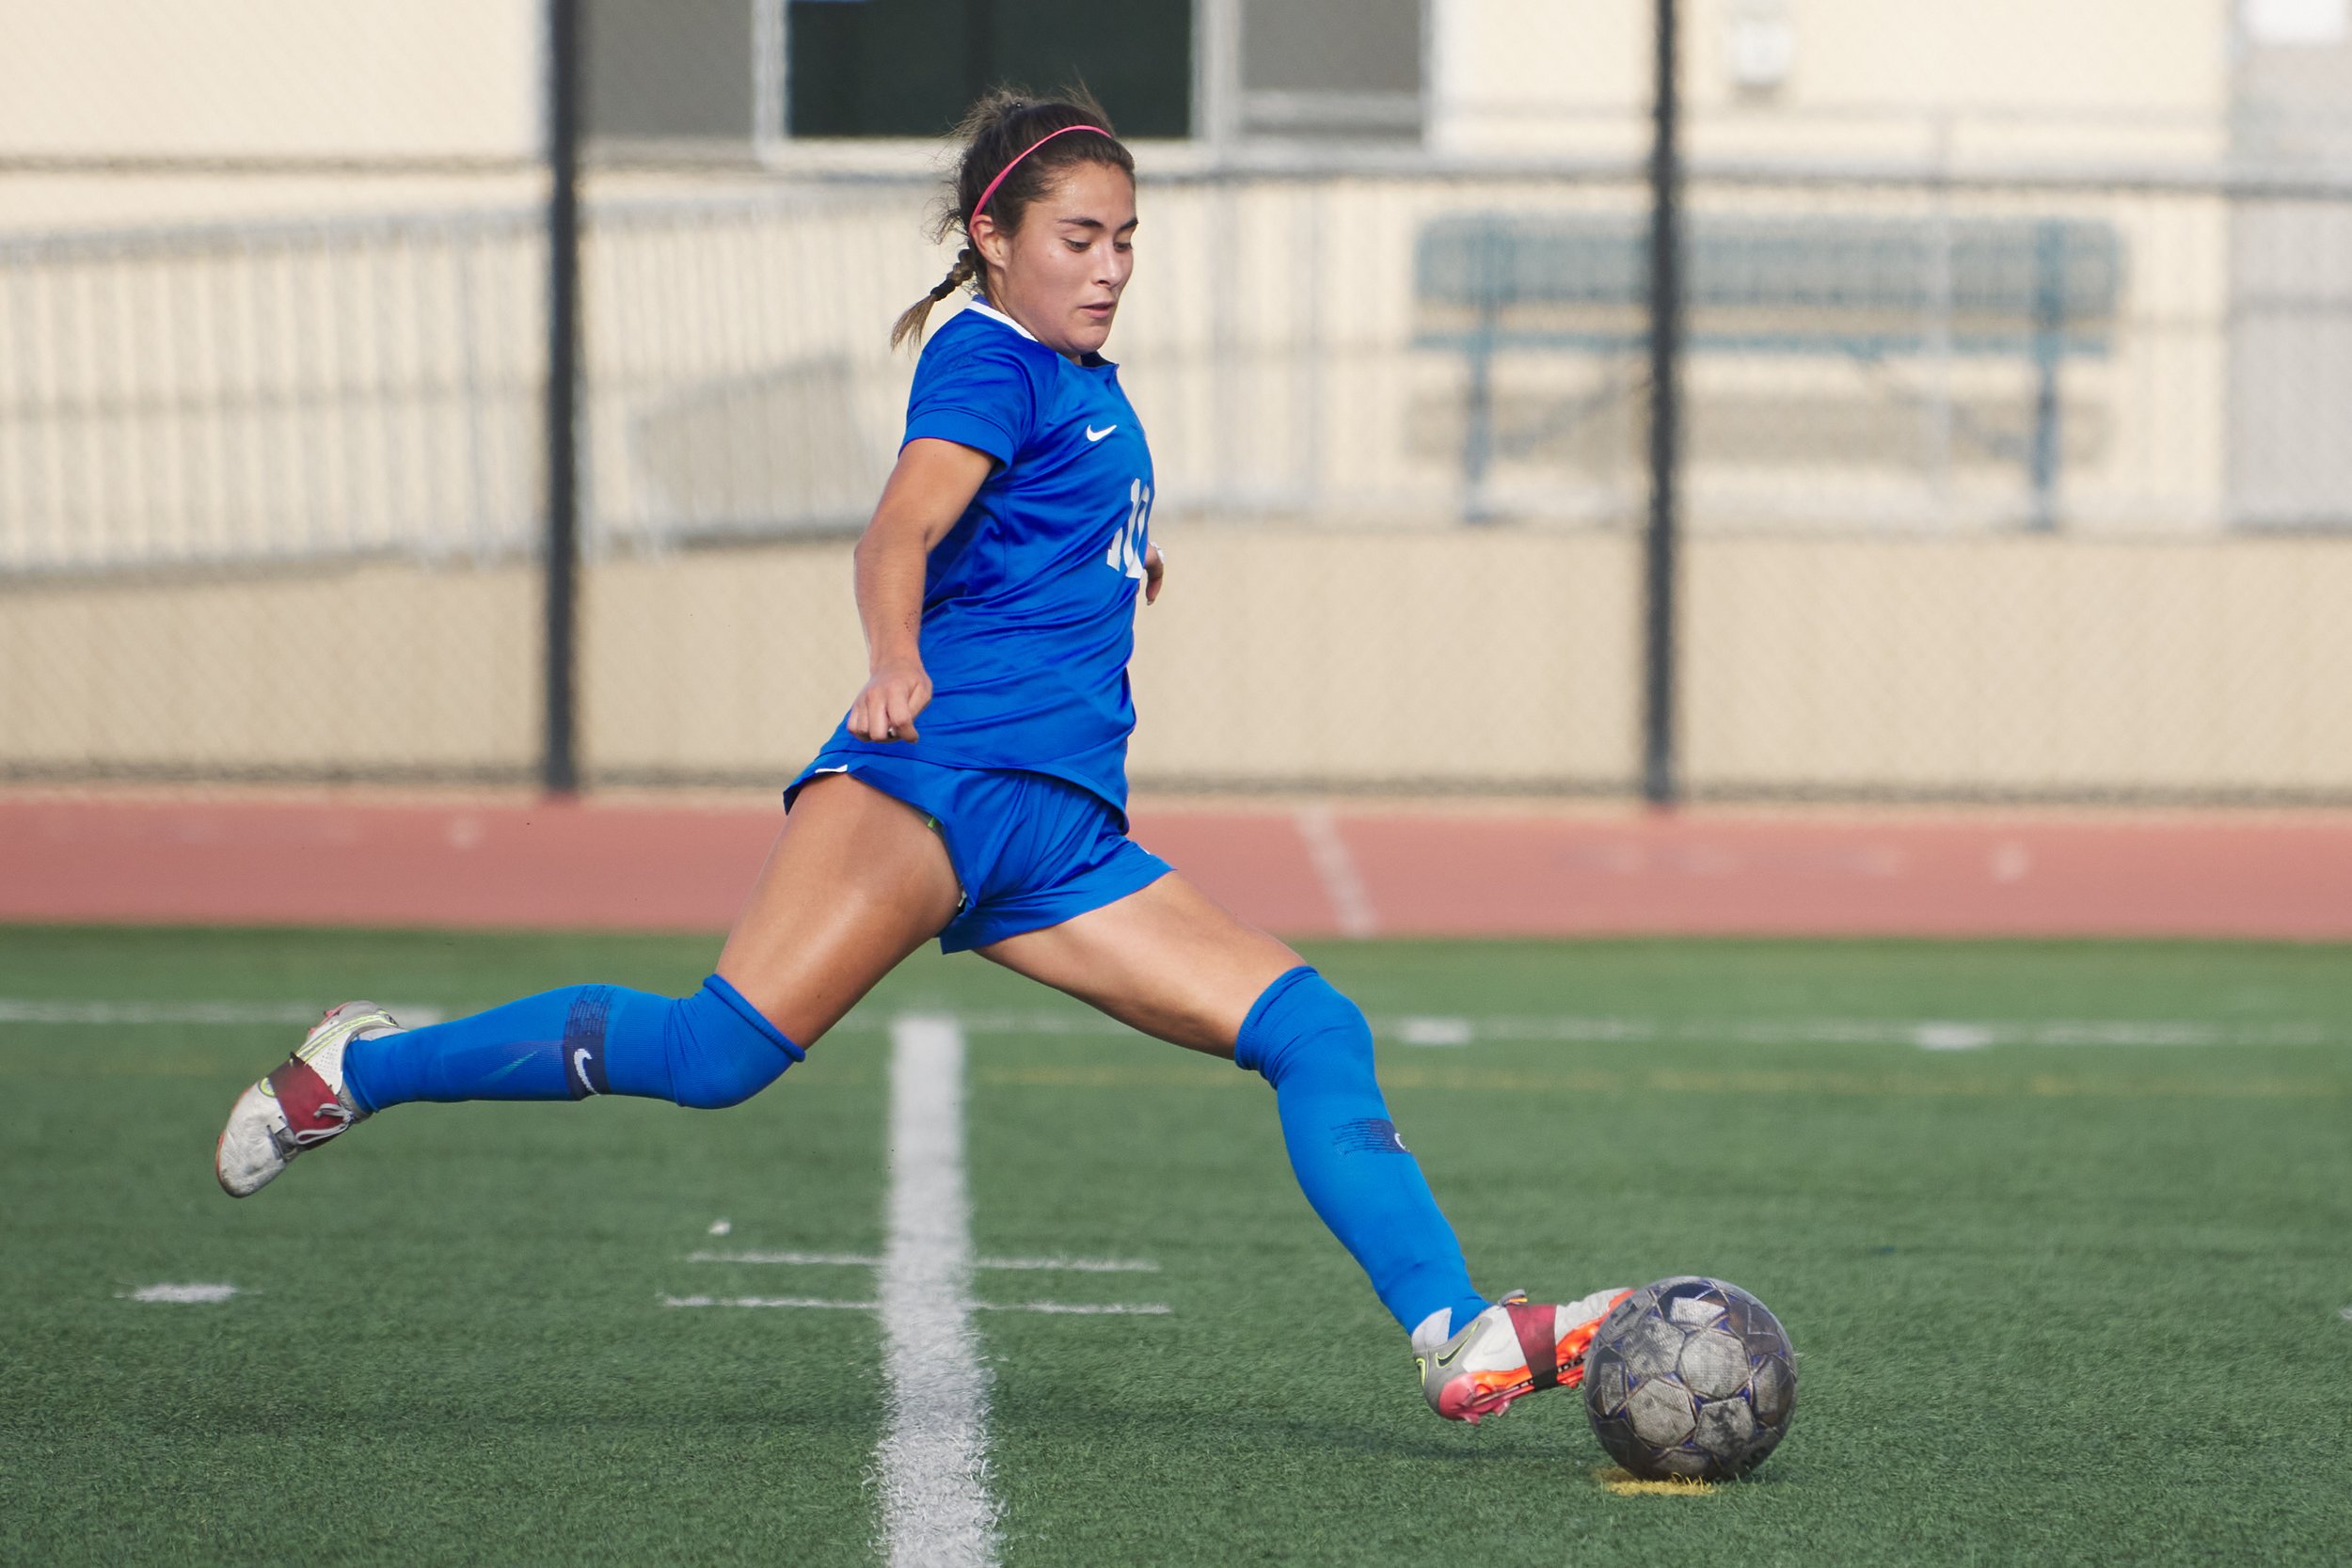  Santa Monica College Corsairs' Ali Alban executes her scoring penalty kick during the women's soccer match against the Glendale Community College Vaqueros on Friday, Oct. 21, 2022, at Corsair Field in Santa Monica, Calif. The Corsairs won 8-0. (Nich